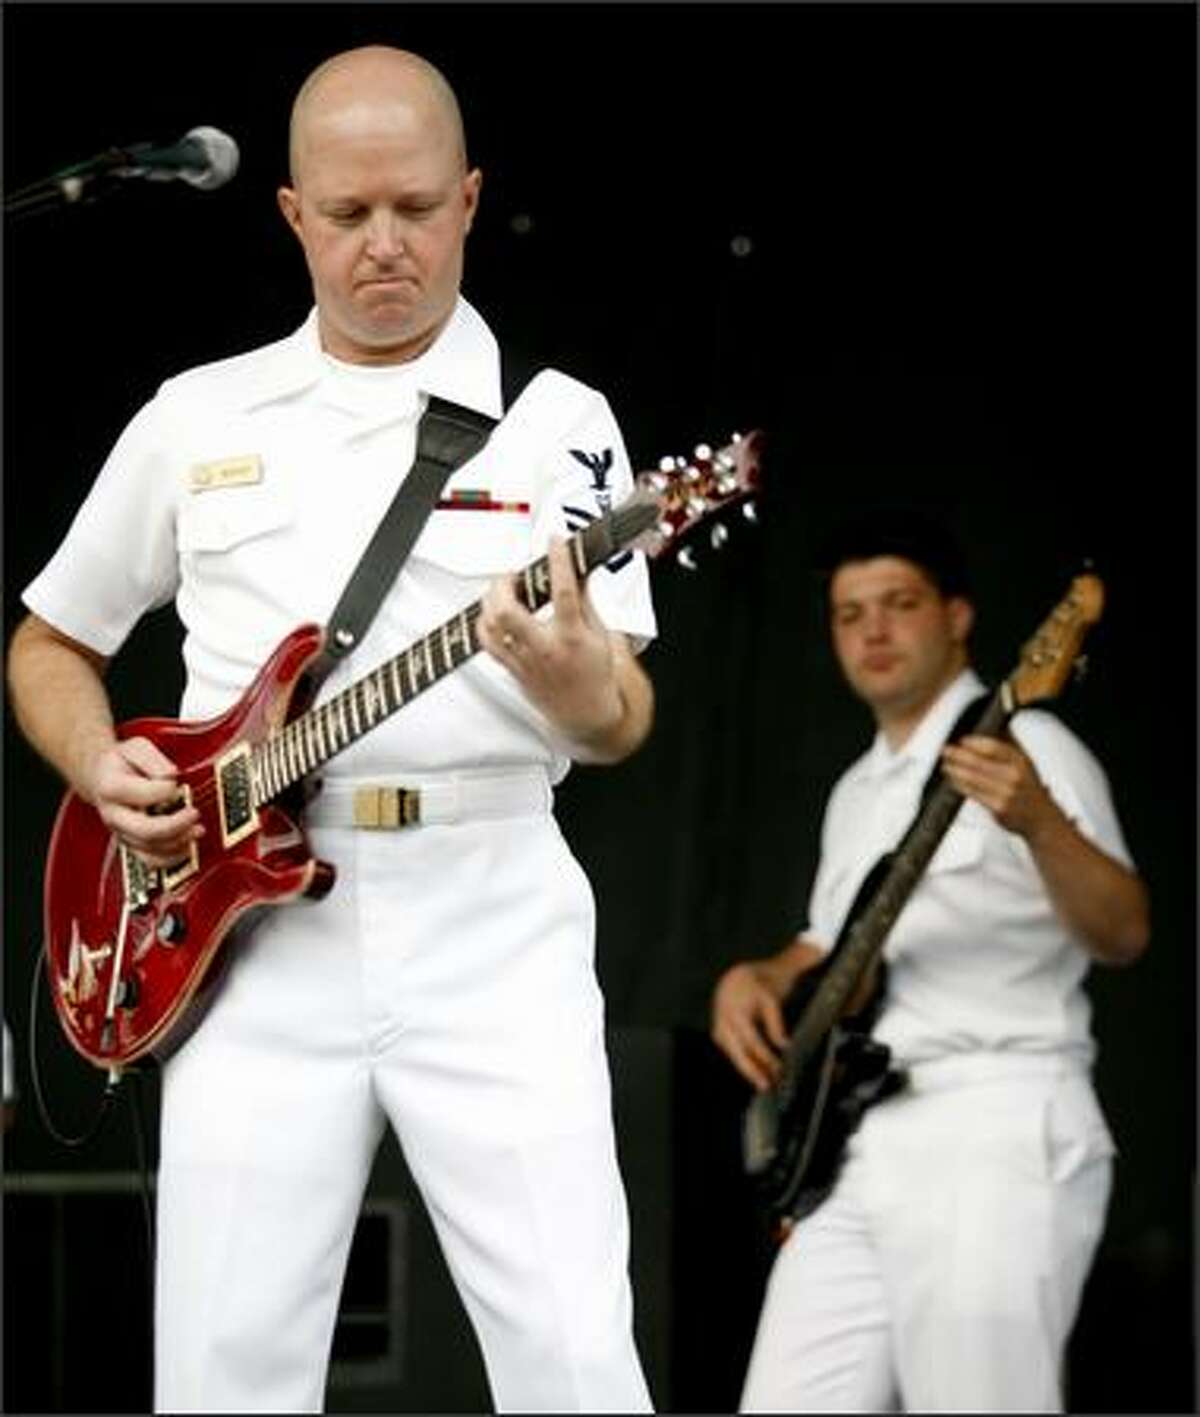 Members of the Navy rock band South by Northwest play a riff at Seafair on Saturday. (Kristine Paulsen/P-I)